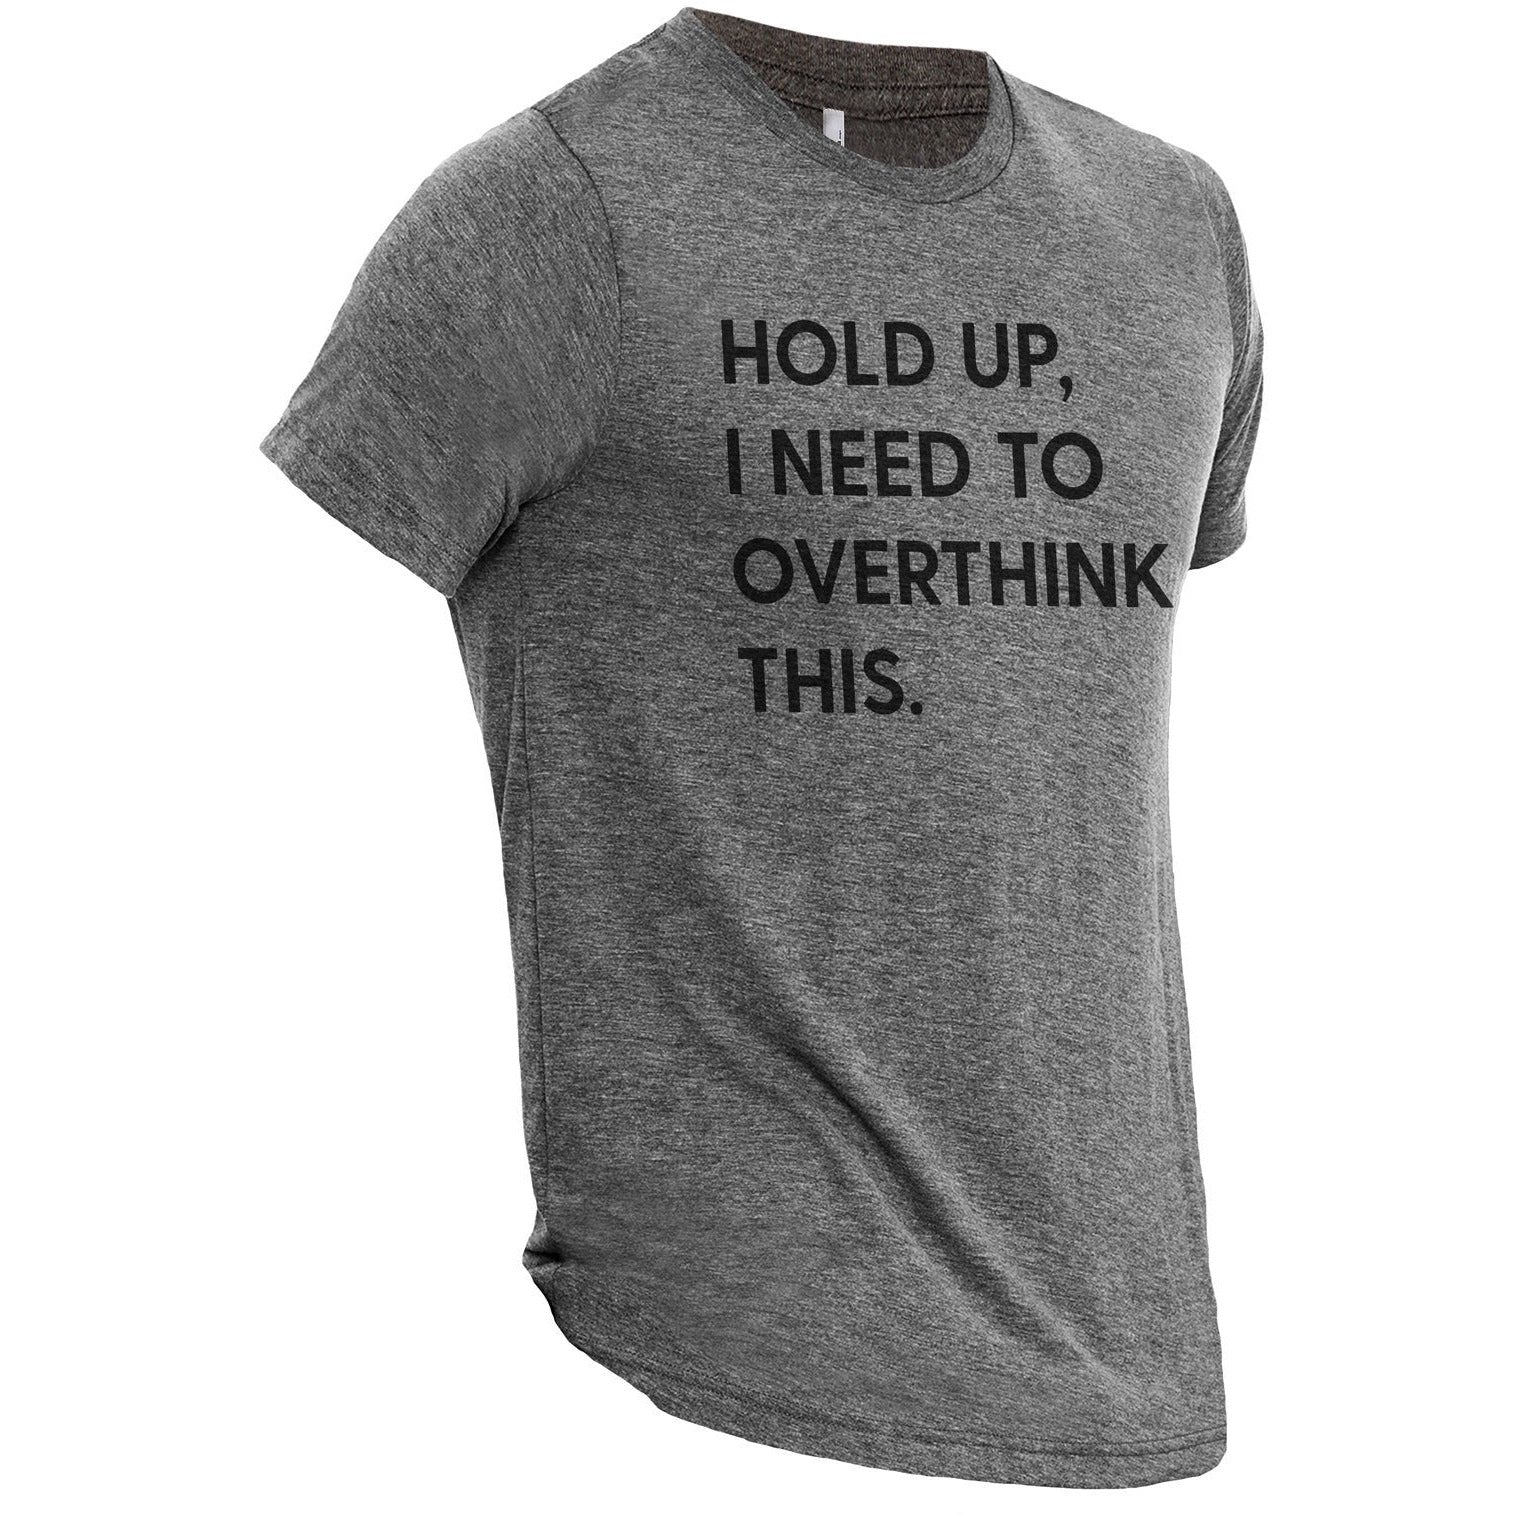 Hold Up, I Need To Rethink This Heather Grey Printed Graphic Men's Crew T-Shirt Tee Side View